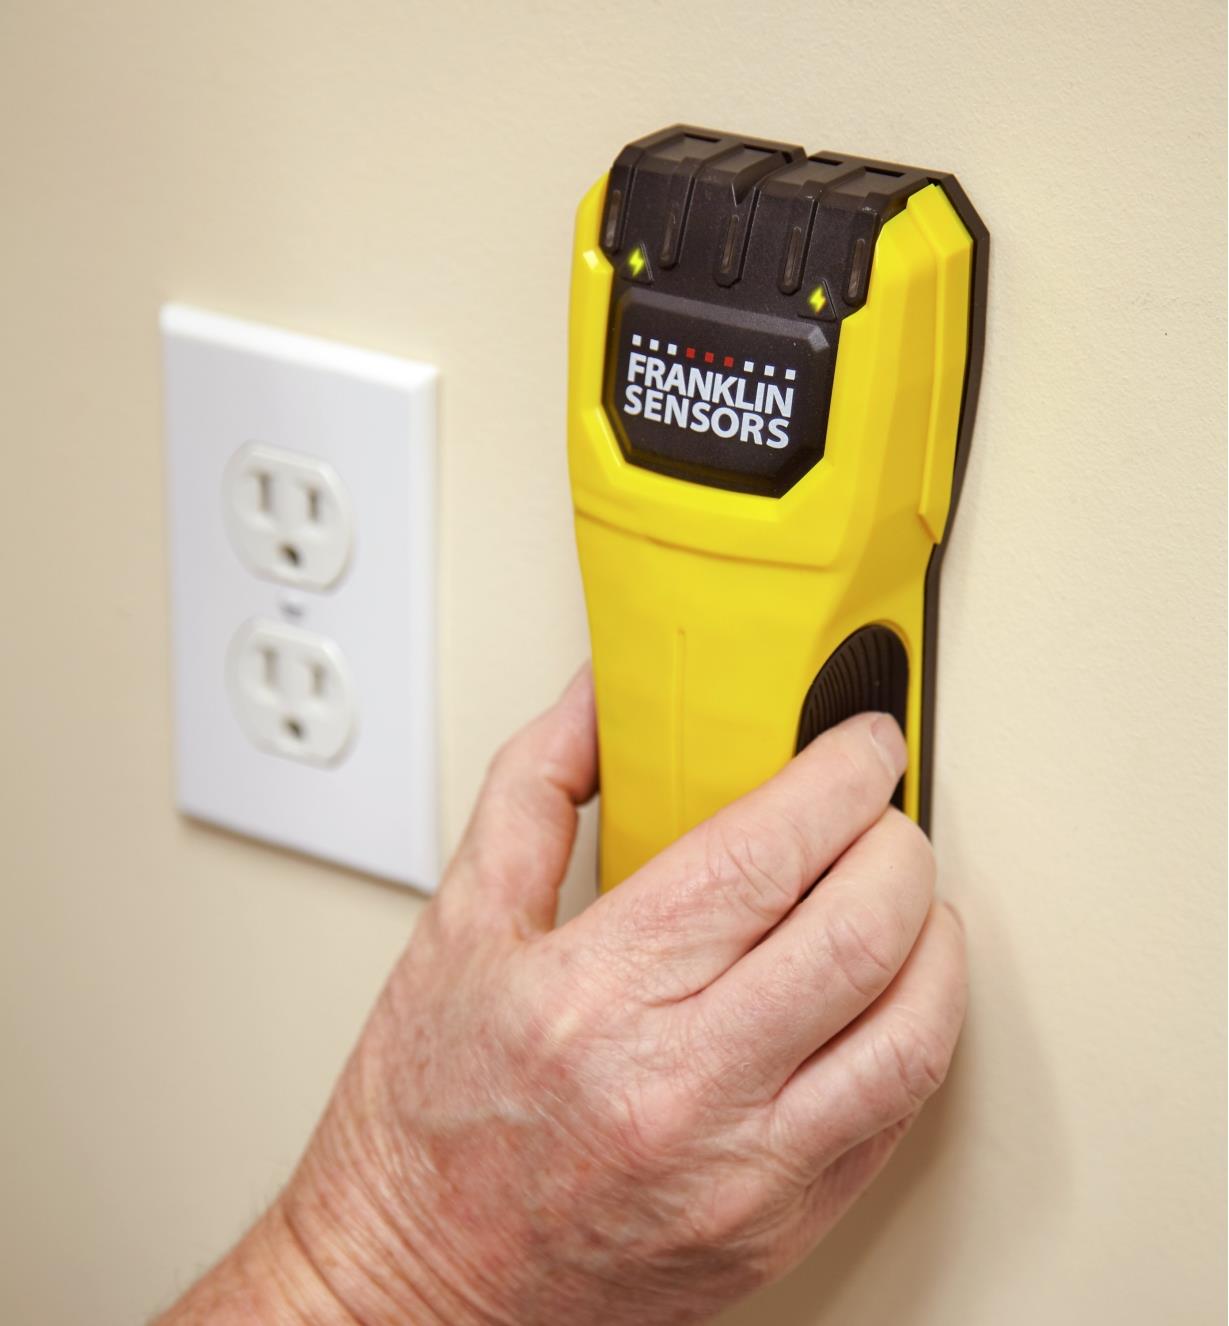 The Franklin M50 stud detector detects the presence of live electrical wires behind a wall